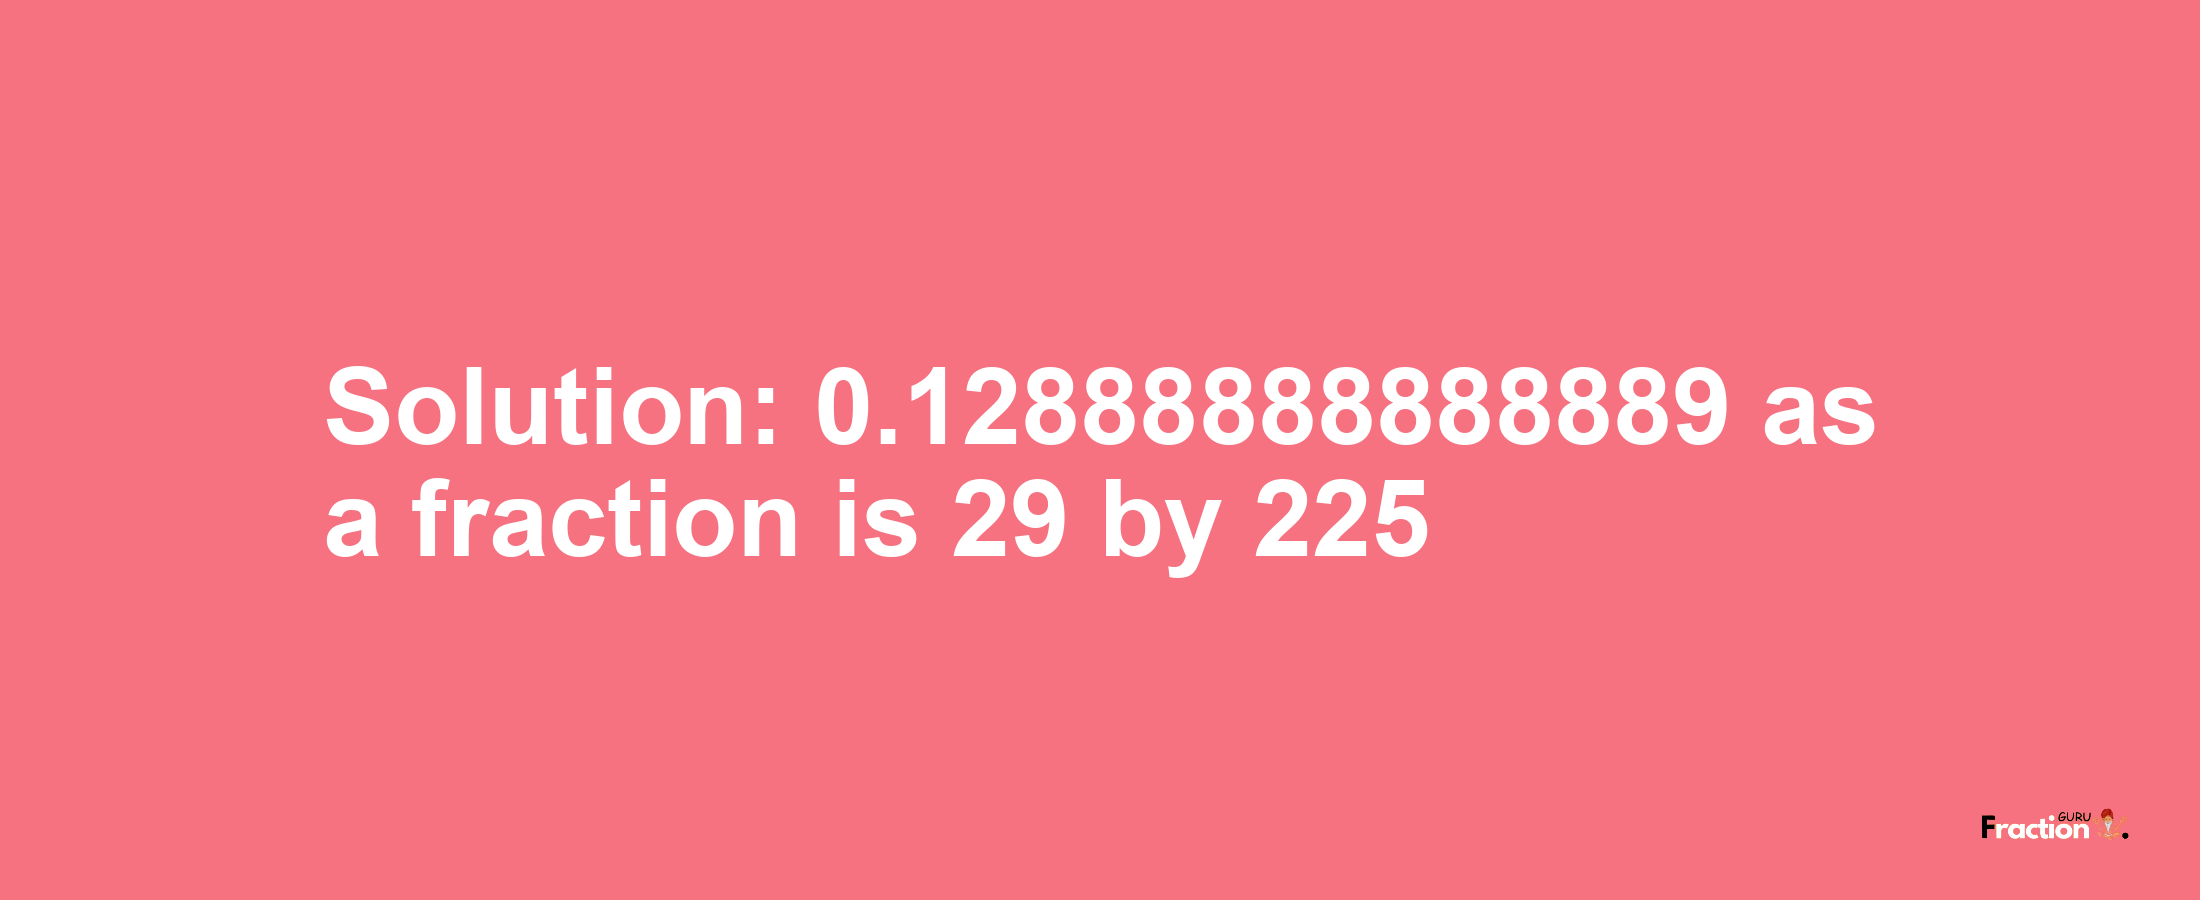 Solution:0.12888888888889 as a fraction is 29/225